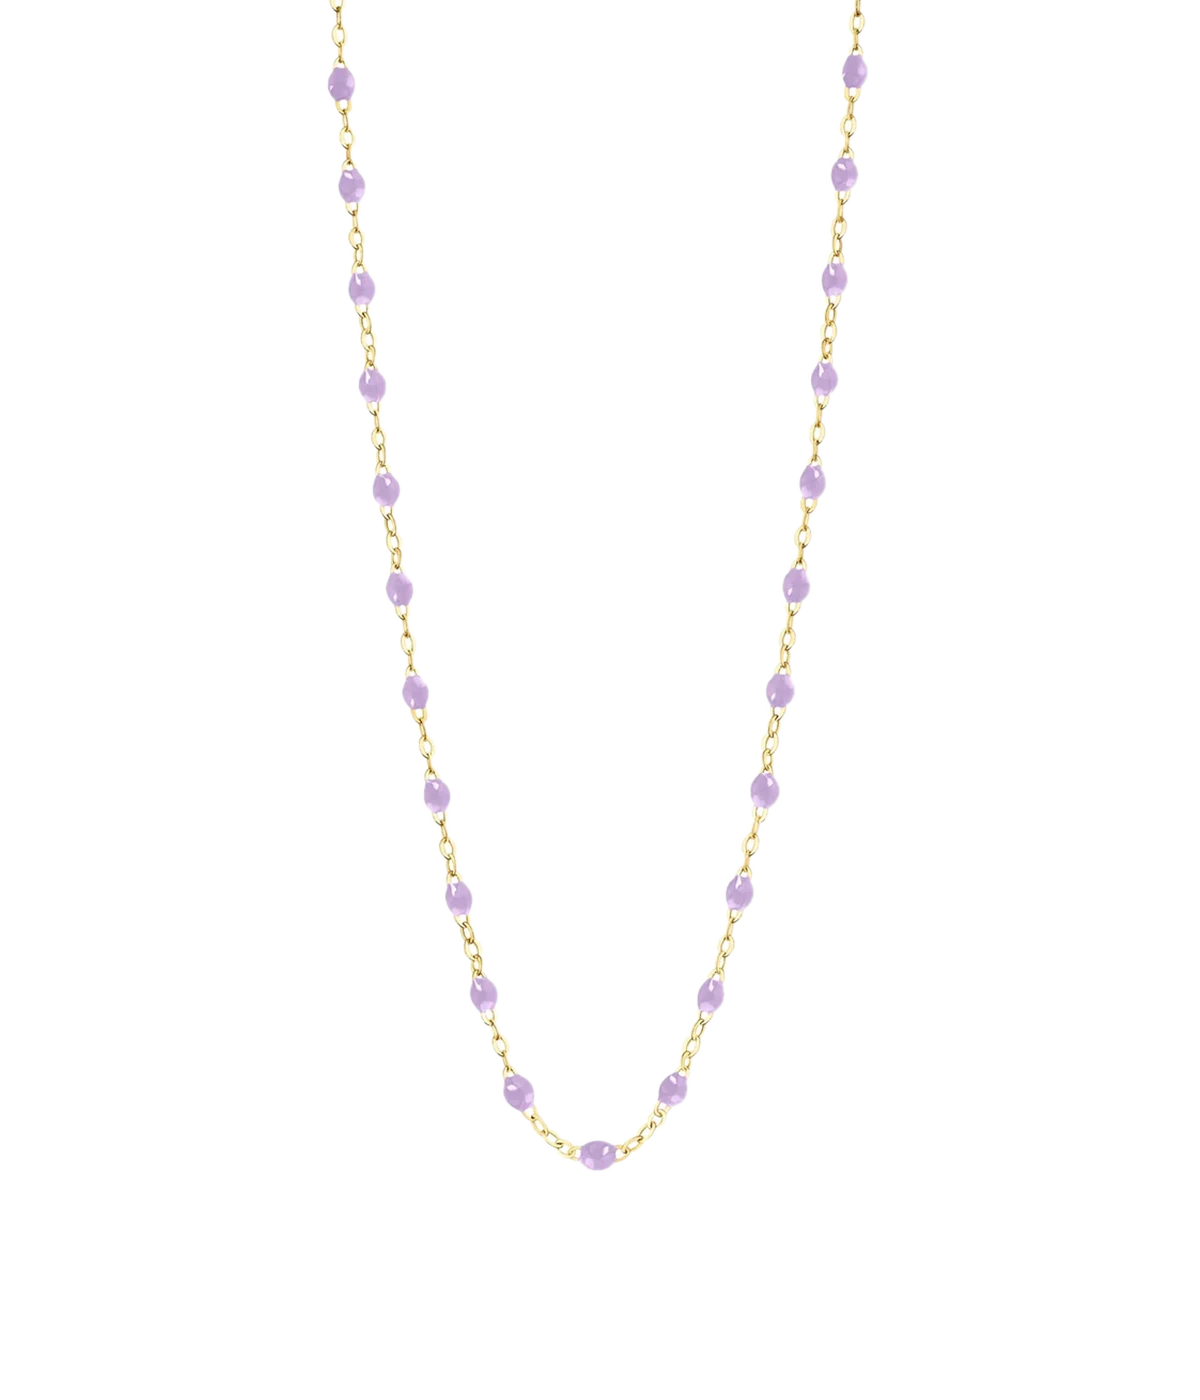 Classic Gigi 50cm Necklace in 18K Yellow Gold & Lilac